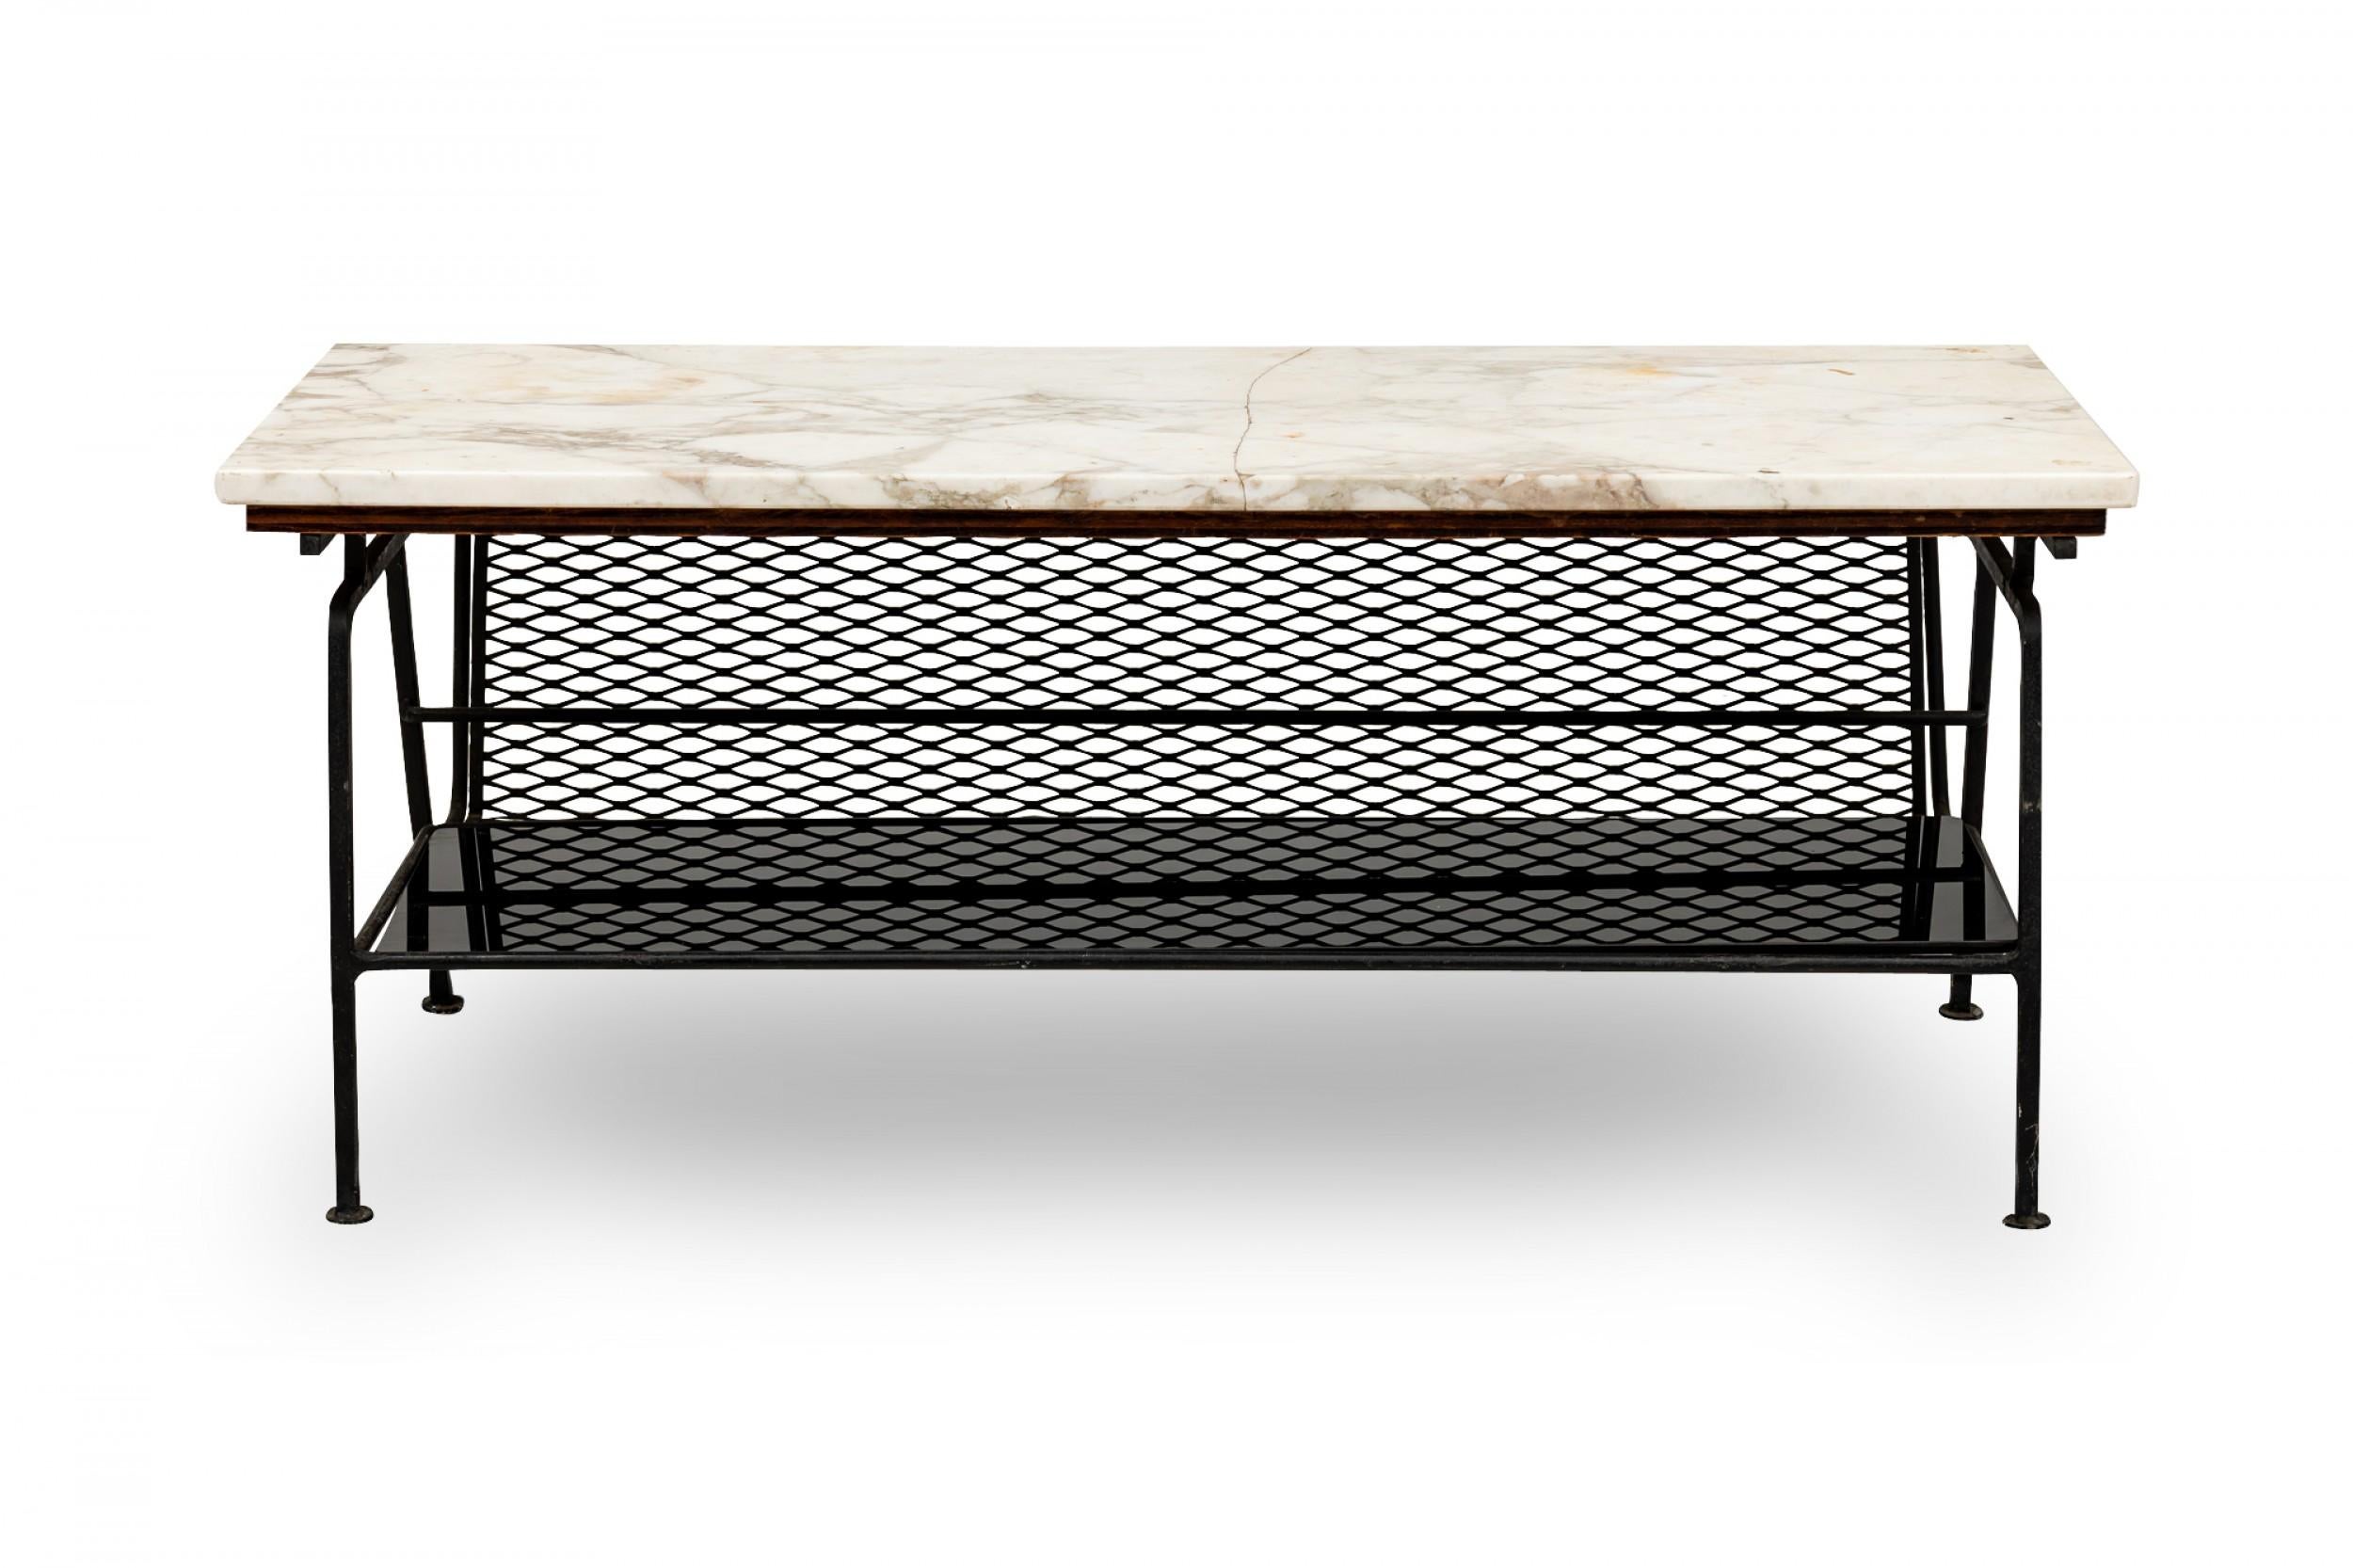 Midcentury 2-tiered black metal coffee table with built in lattice magazine rack basket, white marble top and lower black glass shelf. (Maurizio Tempestini FOR John Salterini).